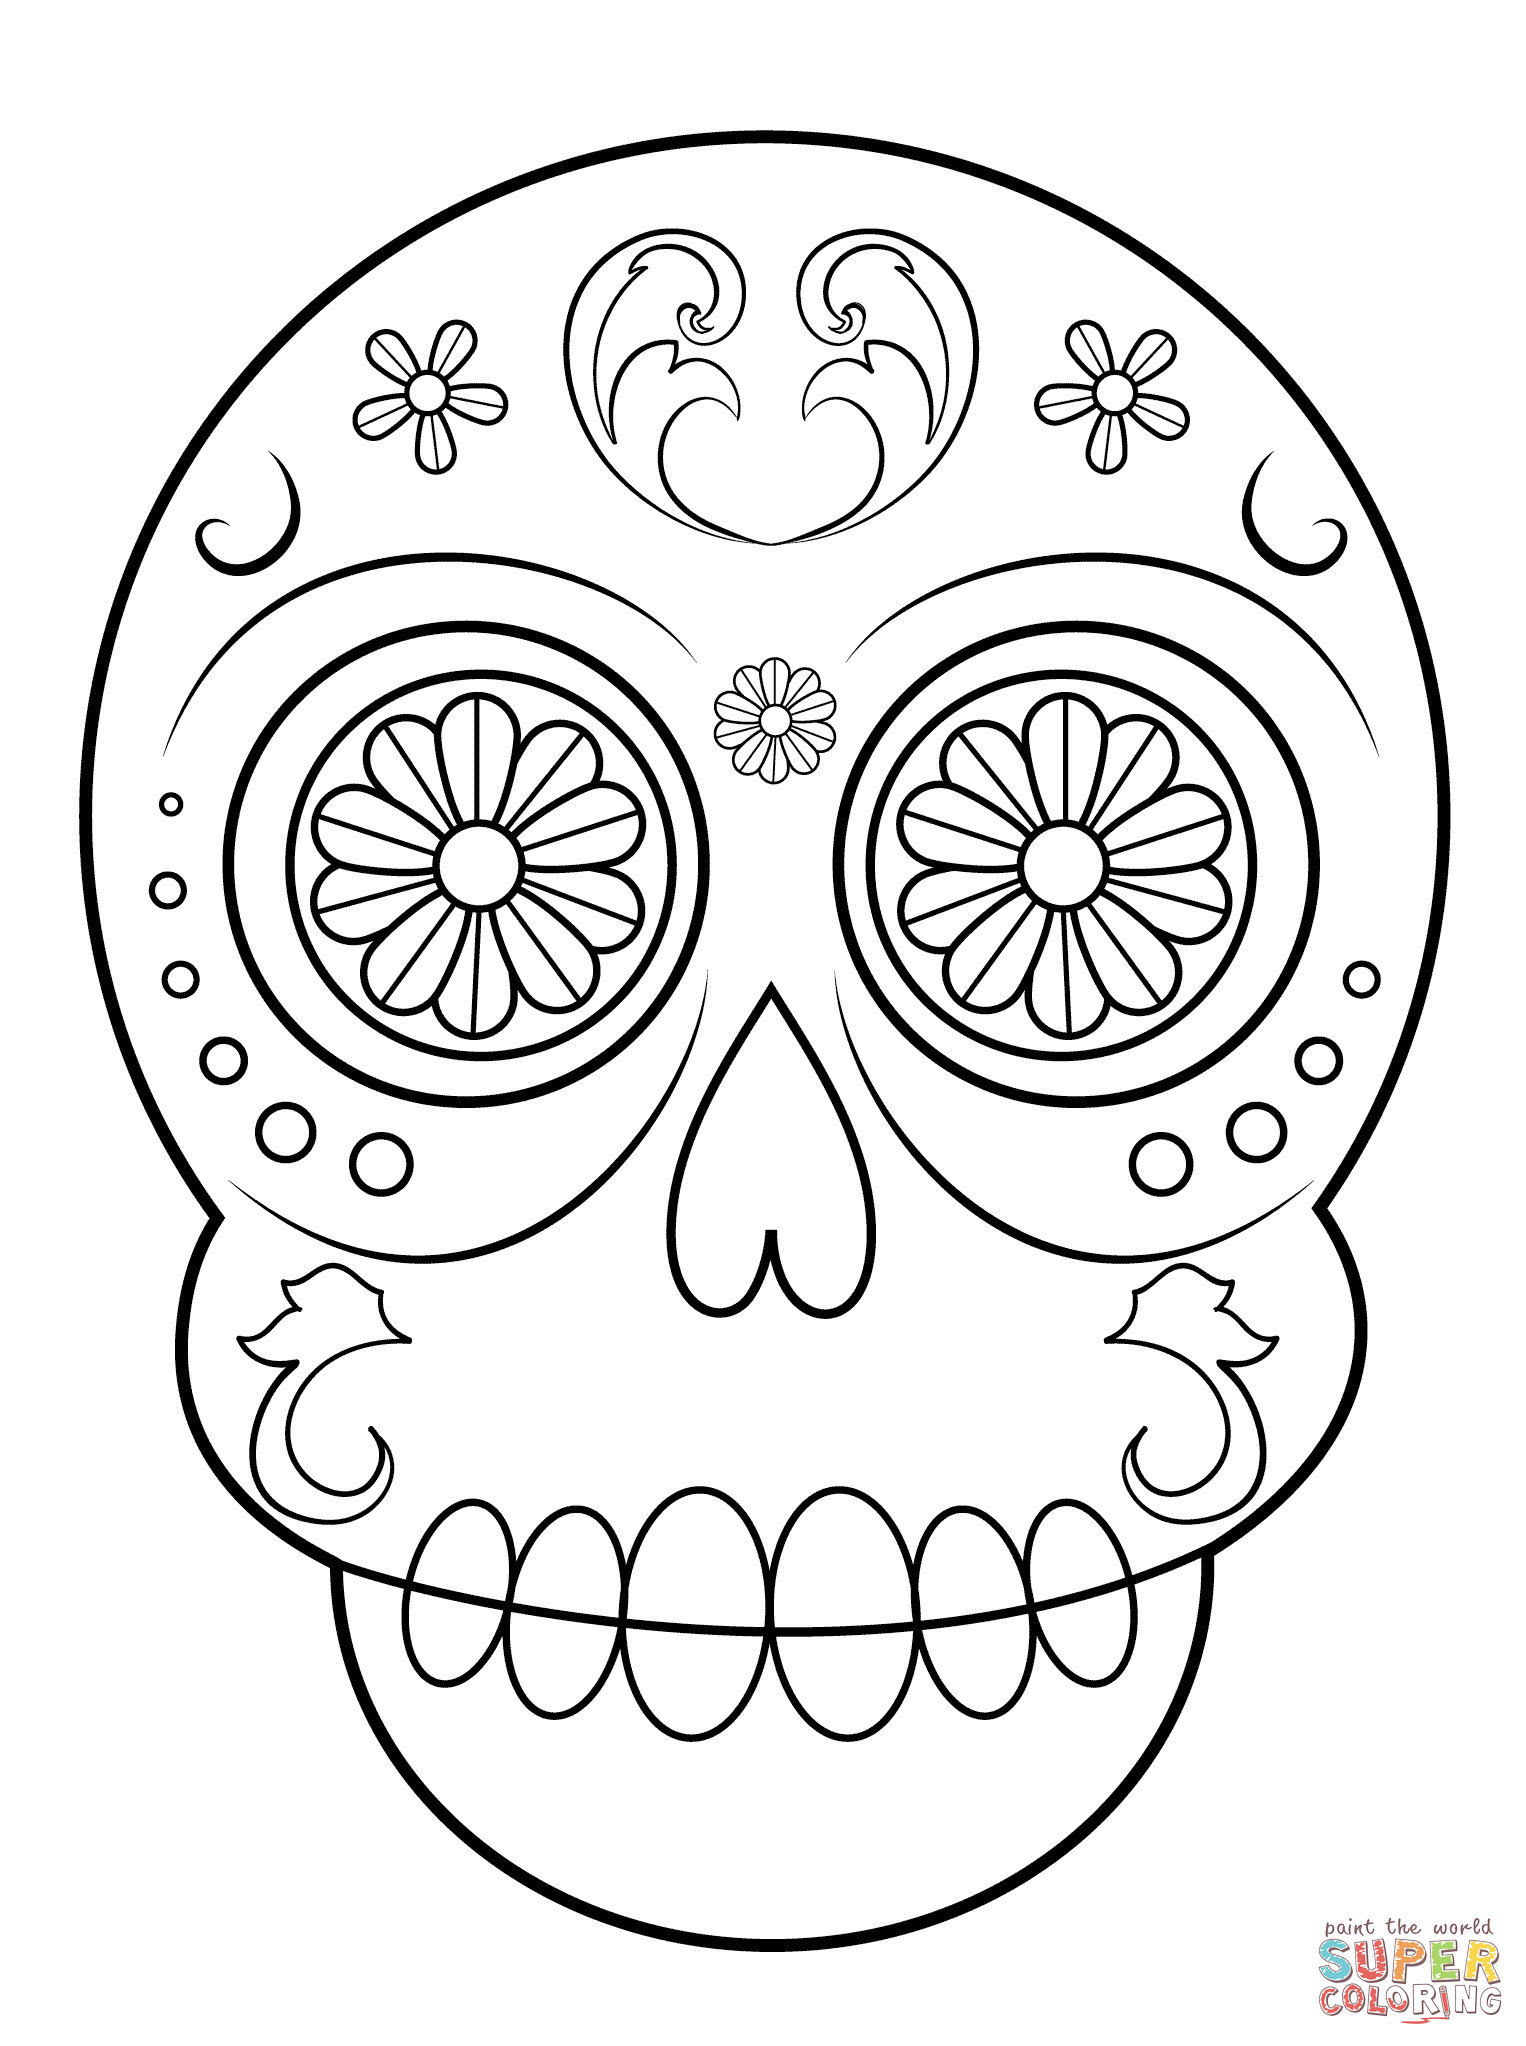 Sugar Skull Coloring Pages For Kids
 Simple Sugar Skull coloring page